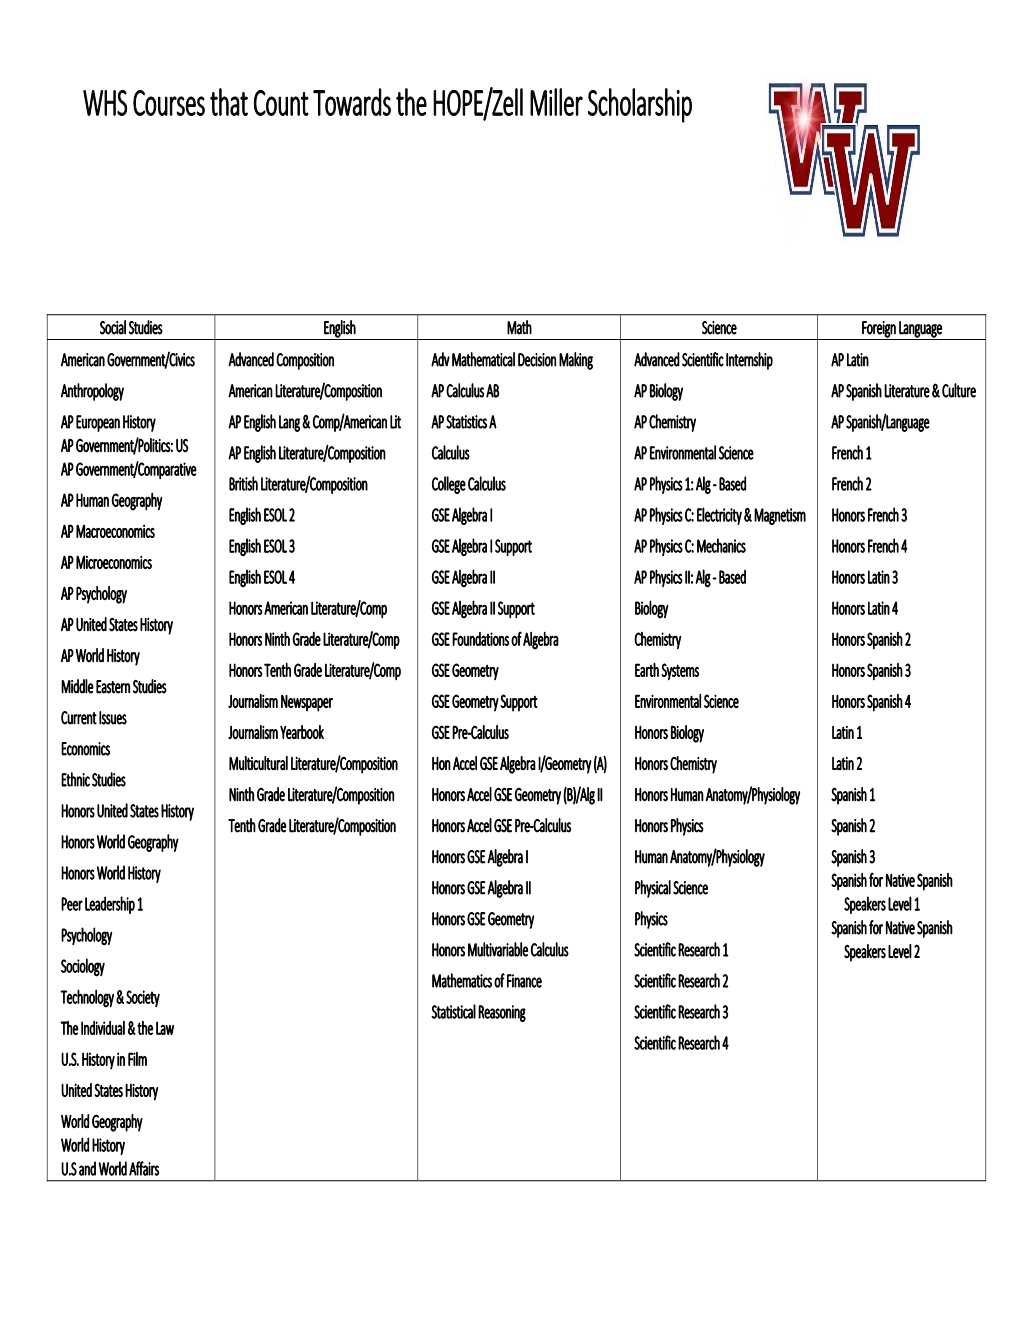 WHS Courses That Count Towards the HOPE/Zell Miller Scholarship